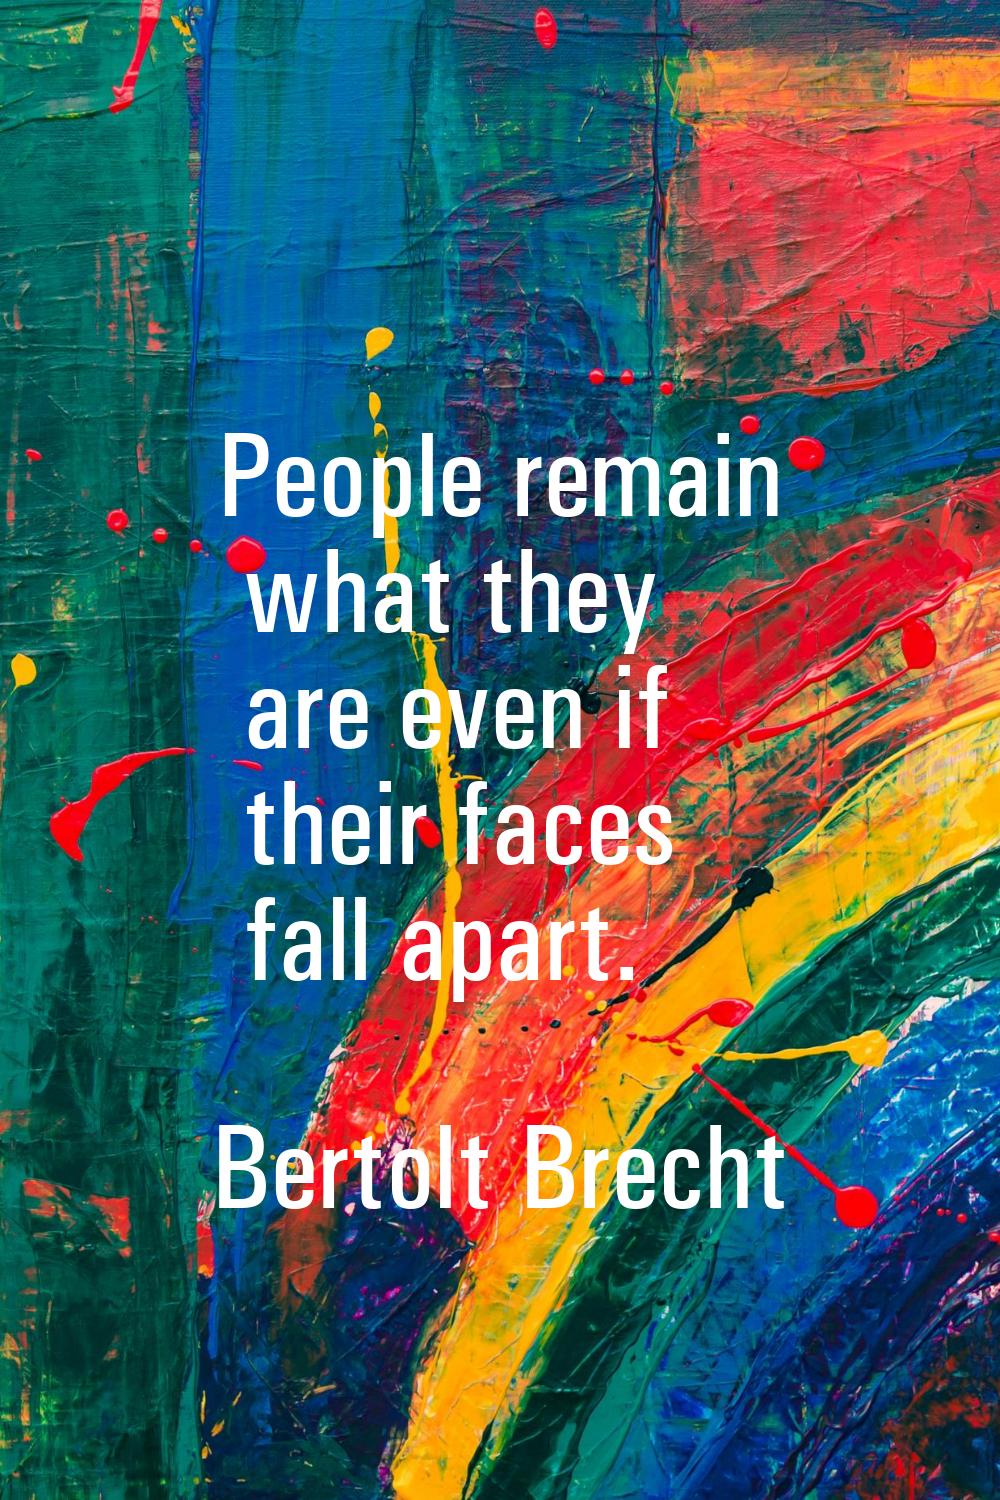 People remain what they are even if their faces fall apart.